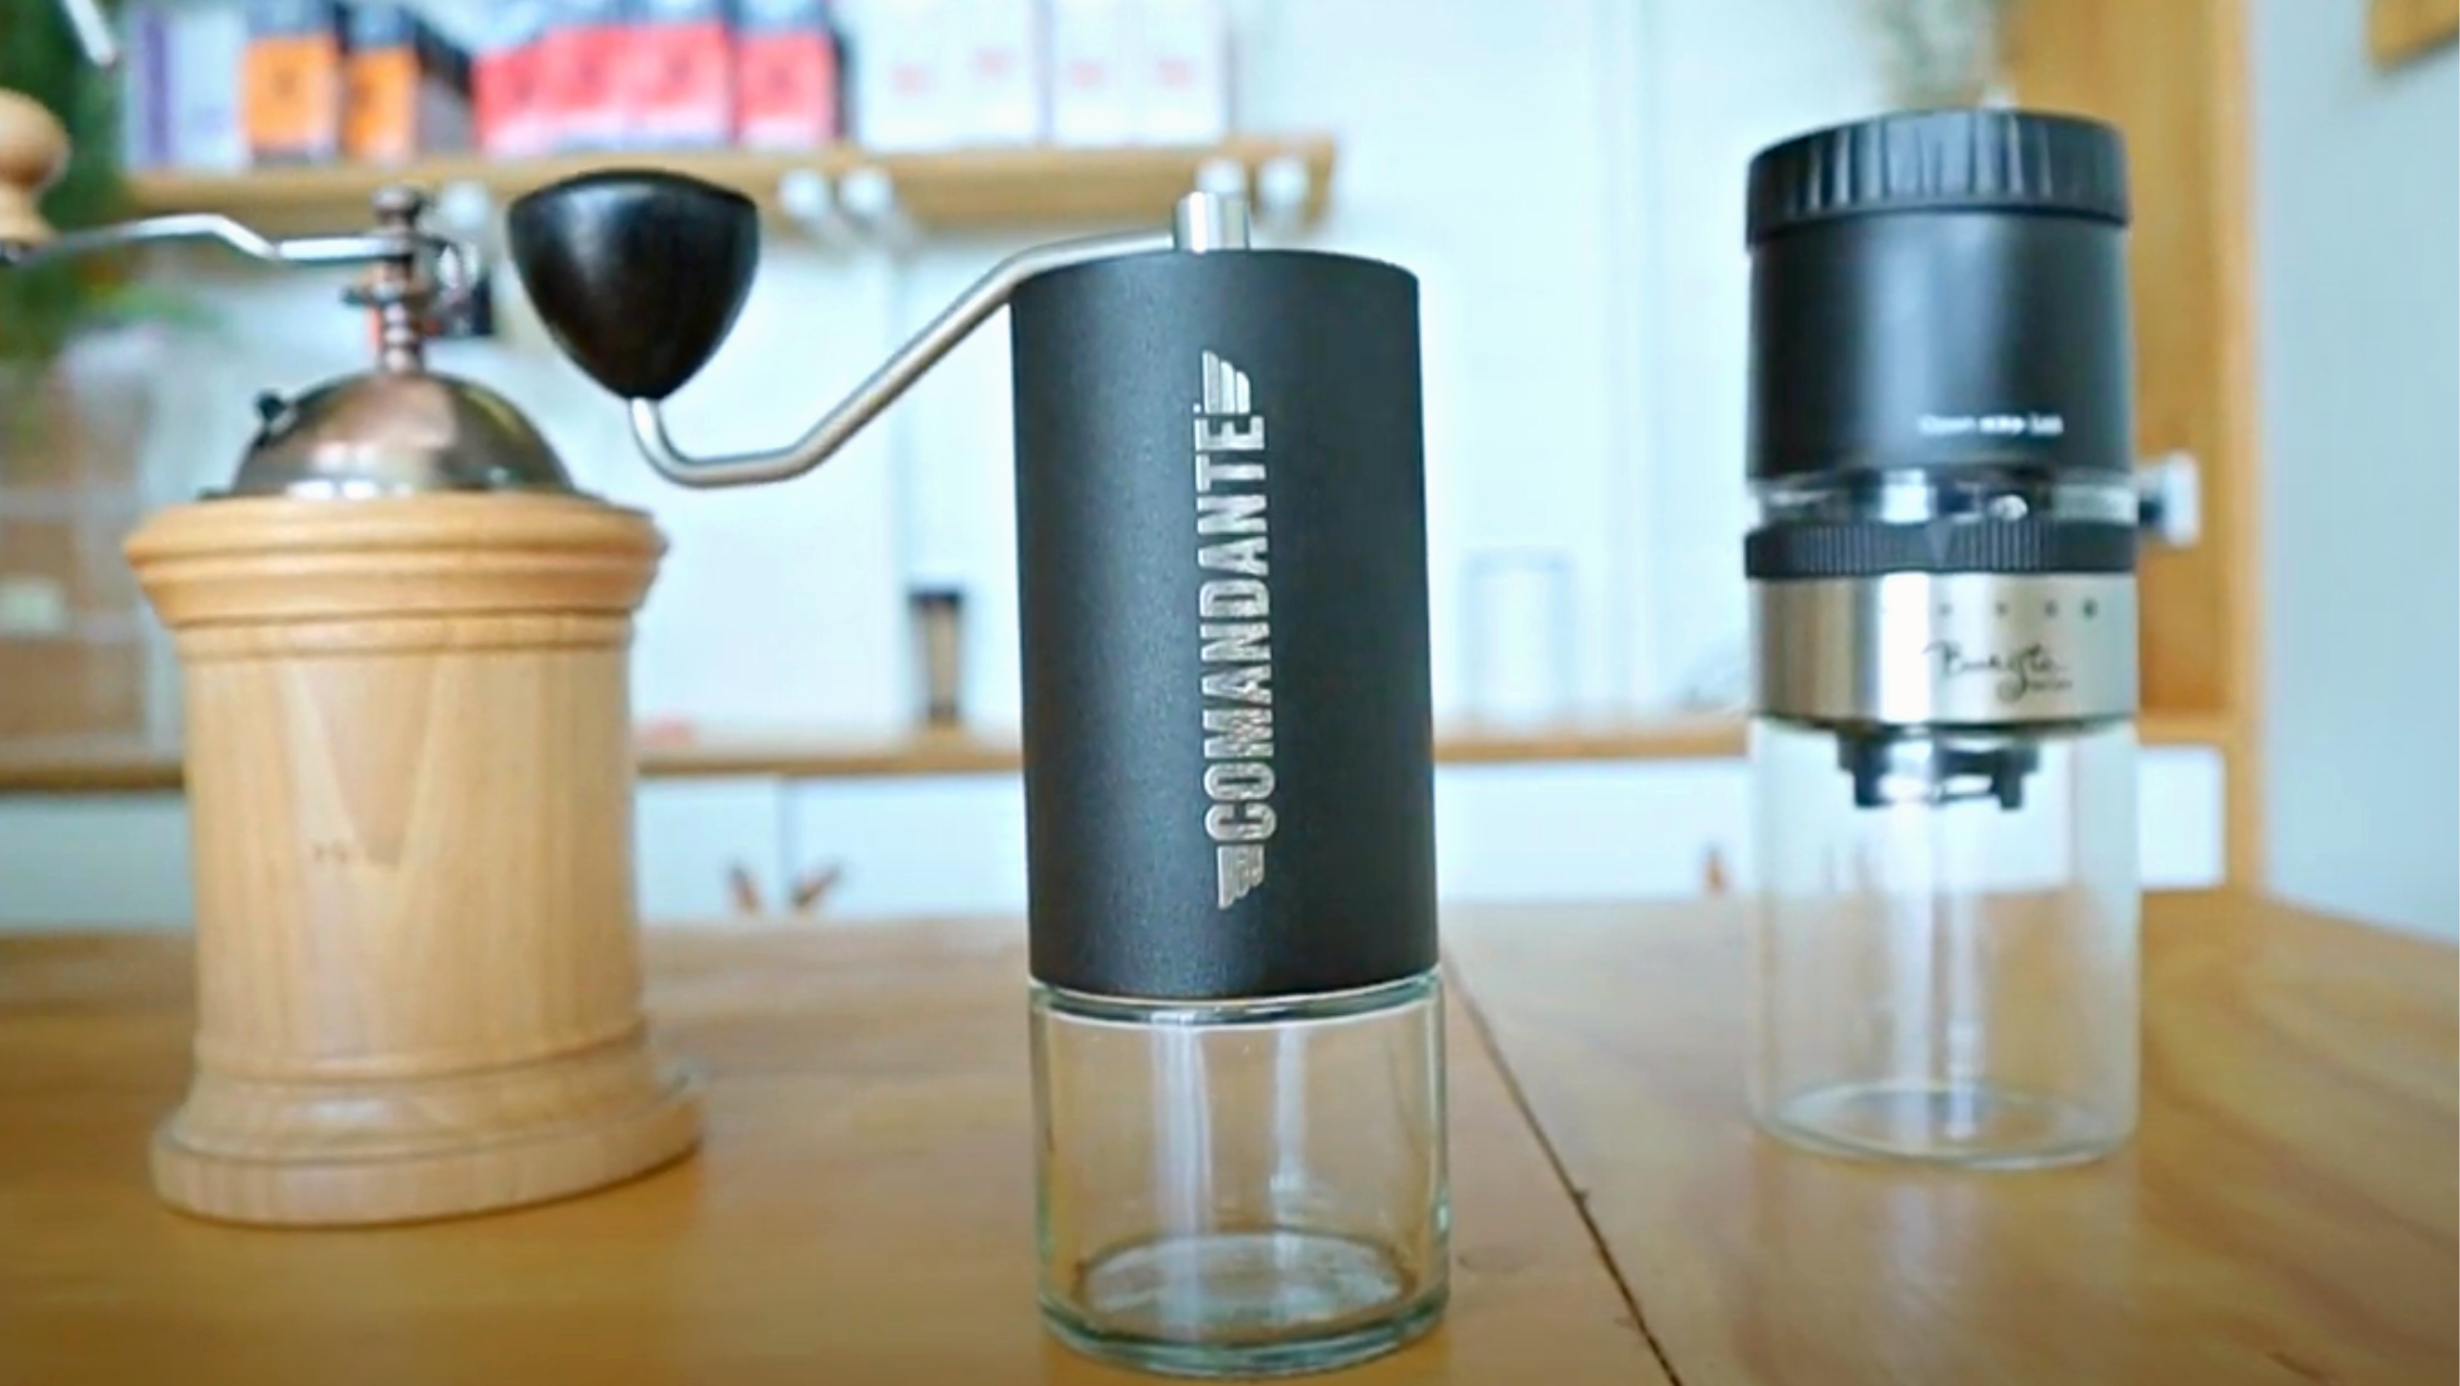 Is the Comandante hand coffee grinder worth the high price point?